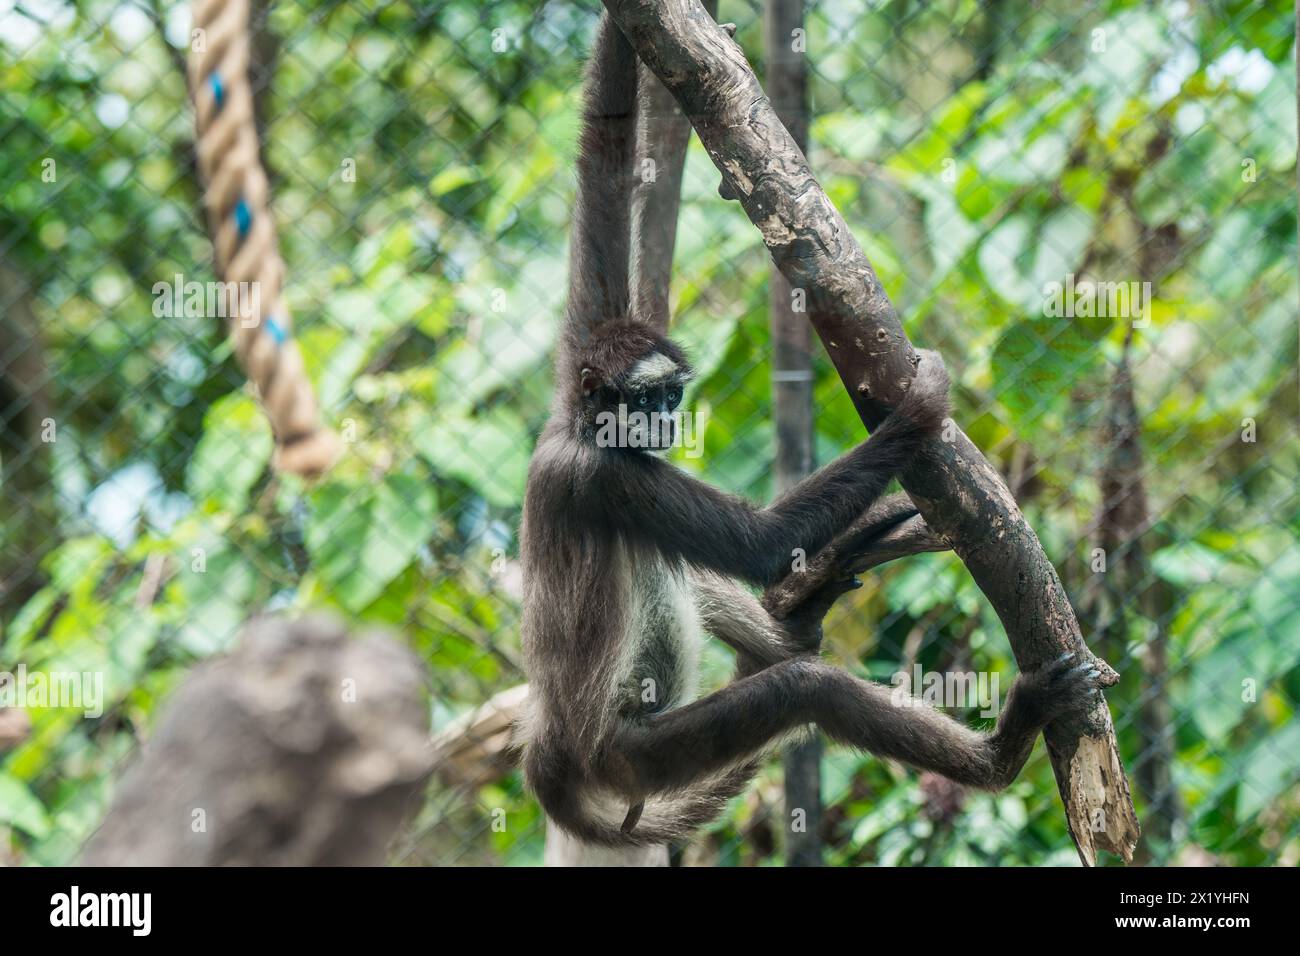 A spider monkey casually hangs from a branch, displaying its agile nature in a zoo habitat Stock Photo